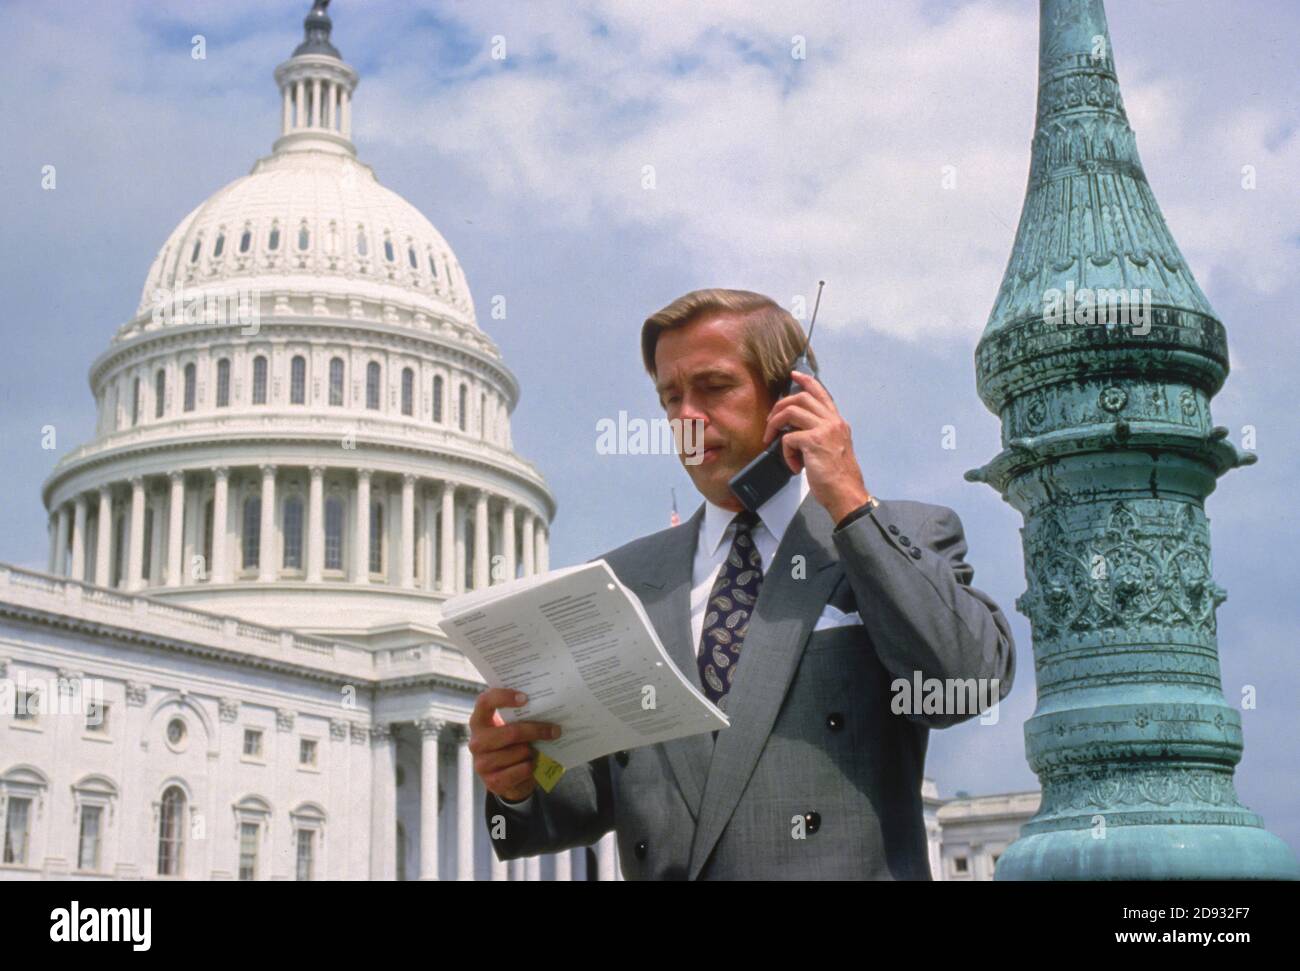 WASHINGTON, DC, USA - Healthcare lobbyist on cell phone in front of U.S. Capitol building. Stock Photo